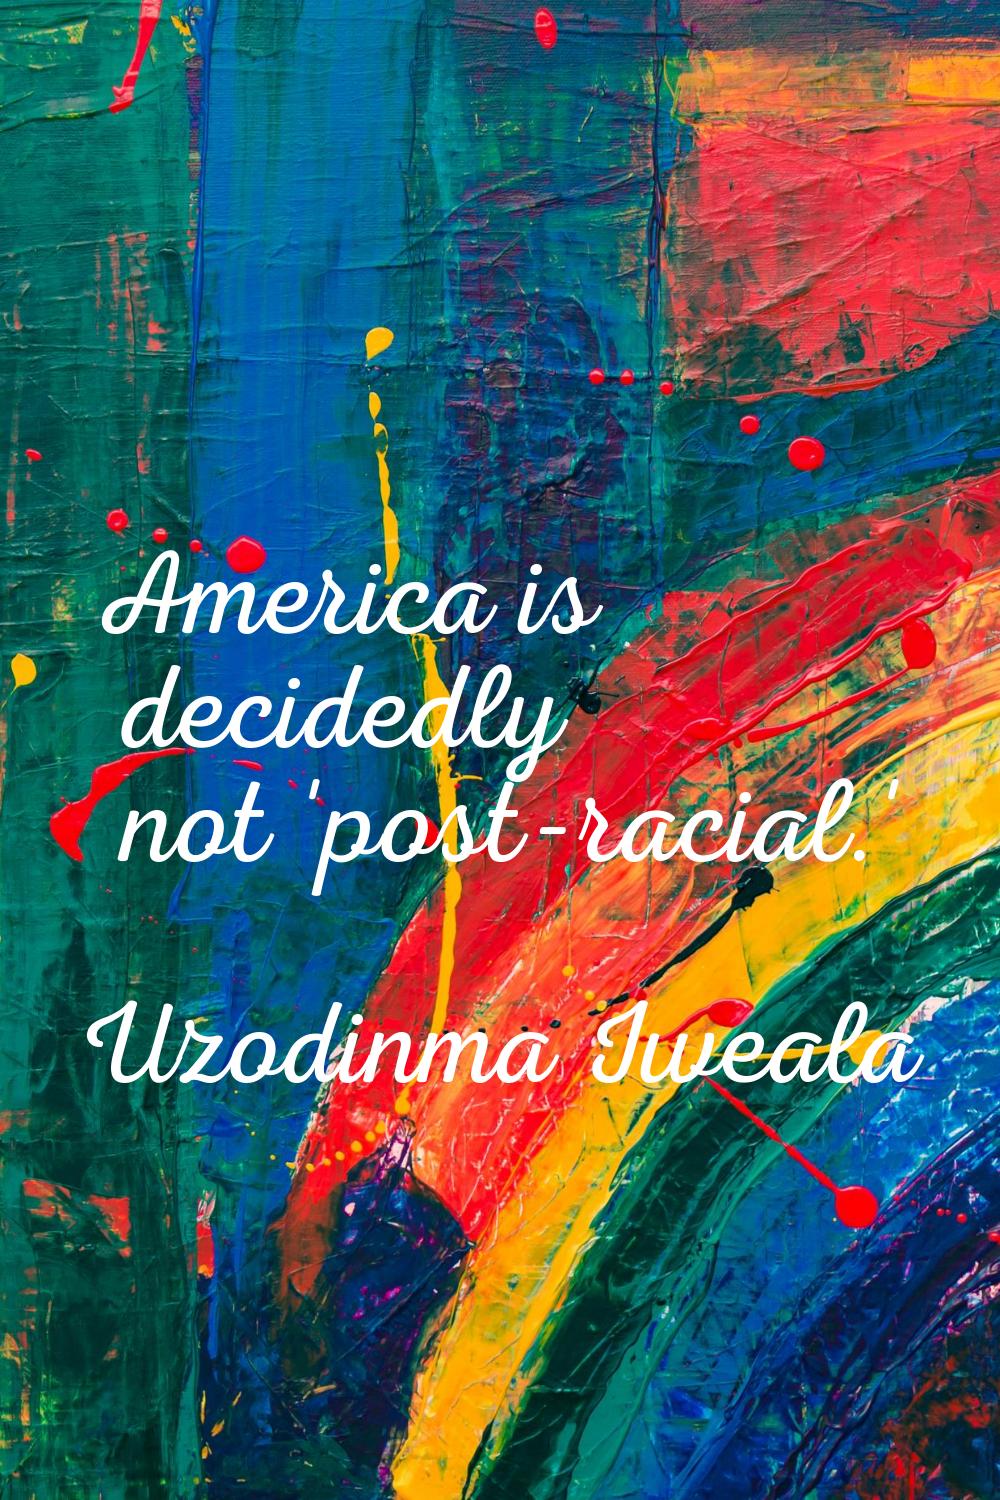 America is decidedly not 'post-racial.'